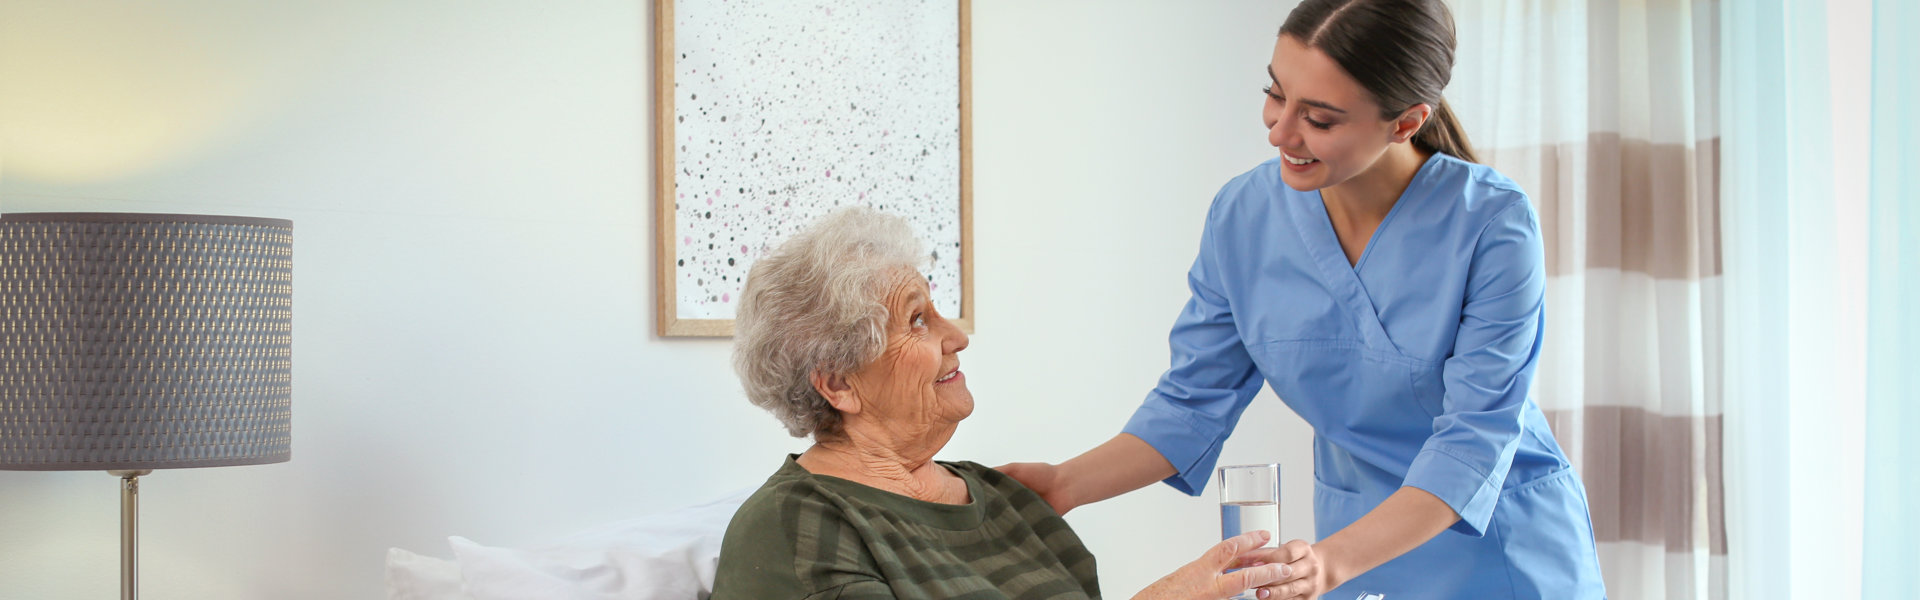 caregiver assist her patient in drinking water